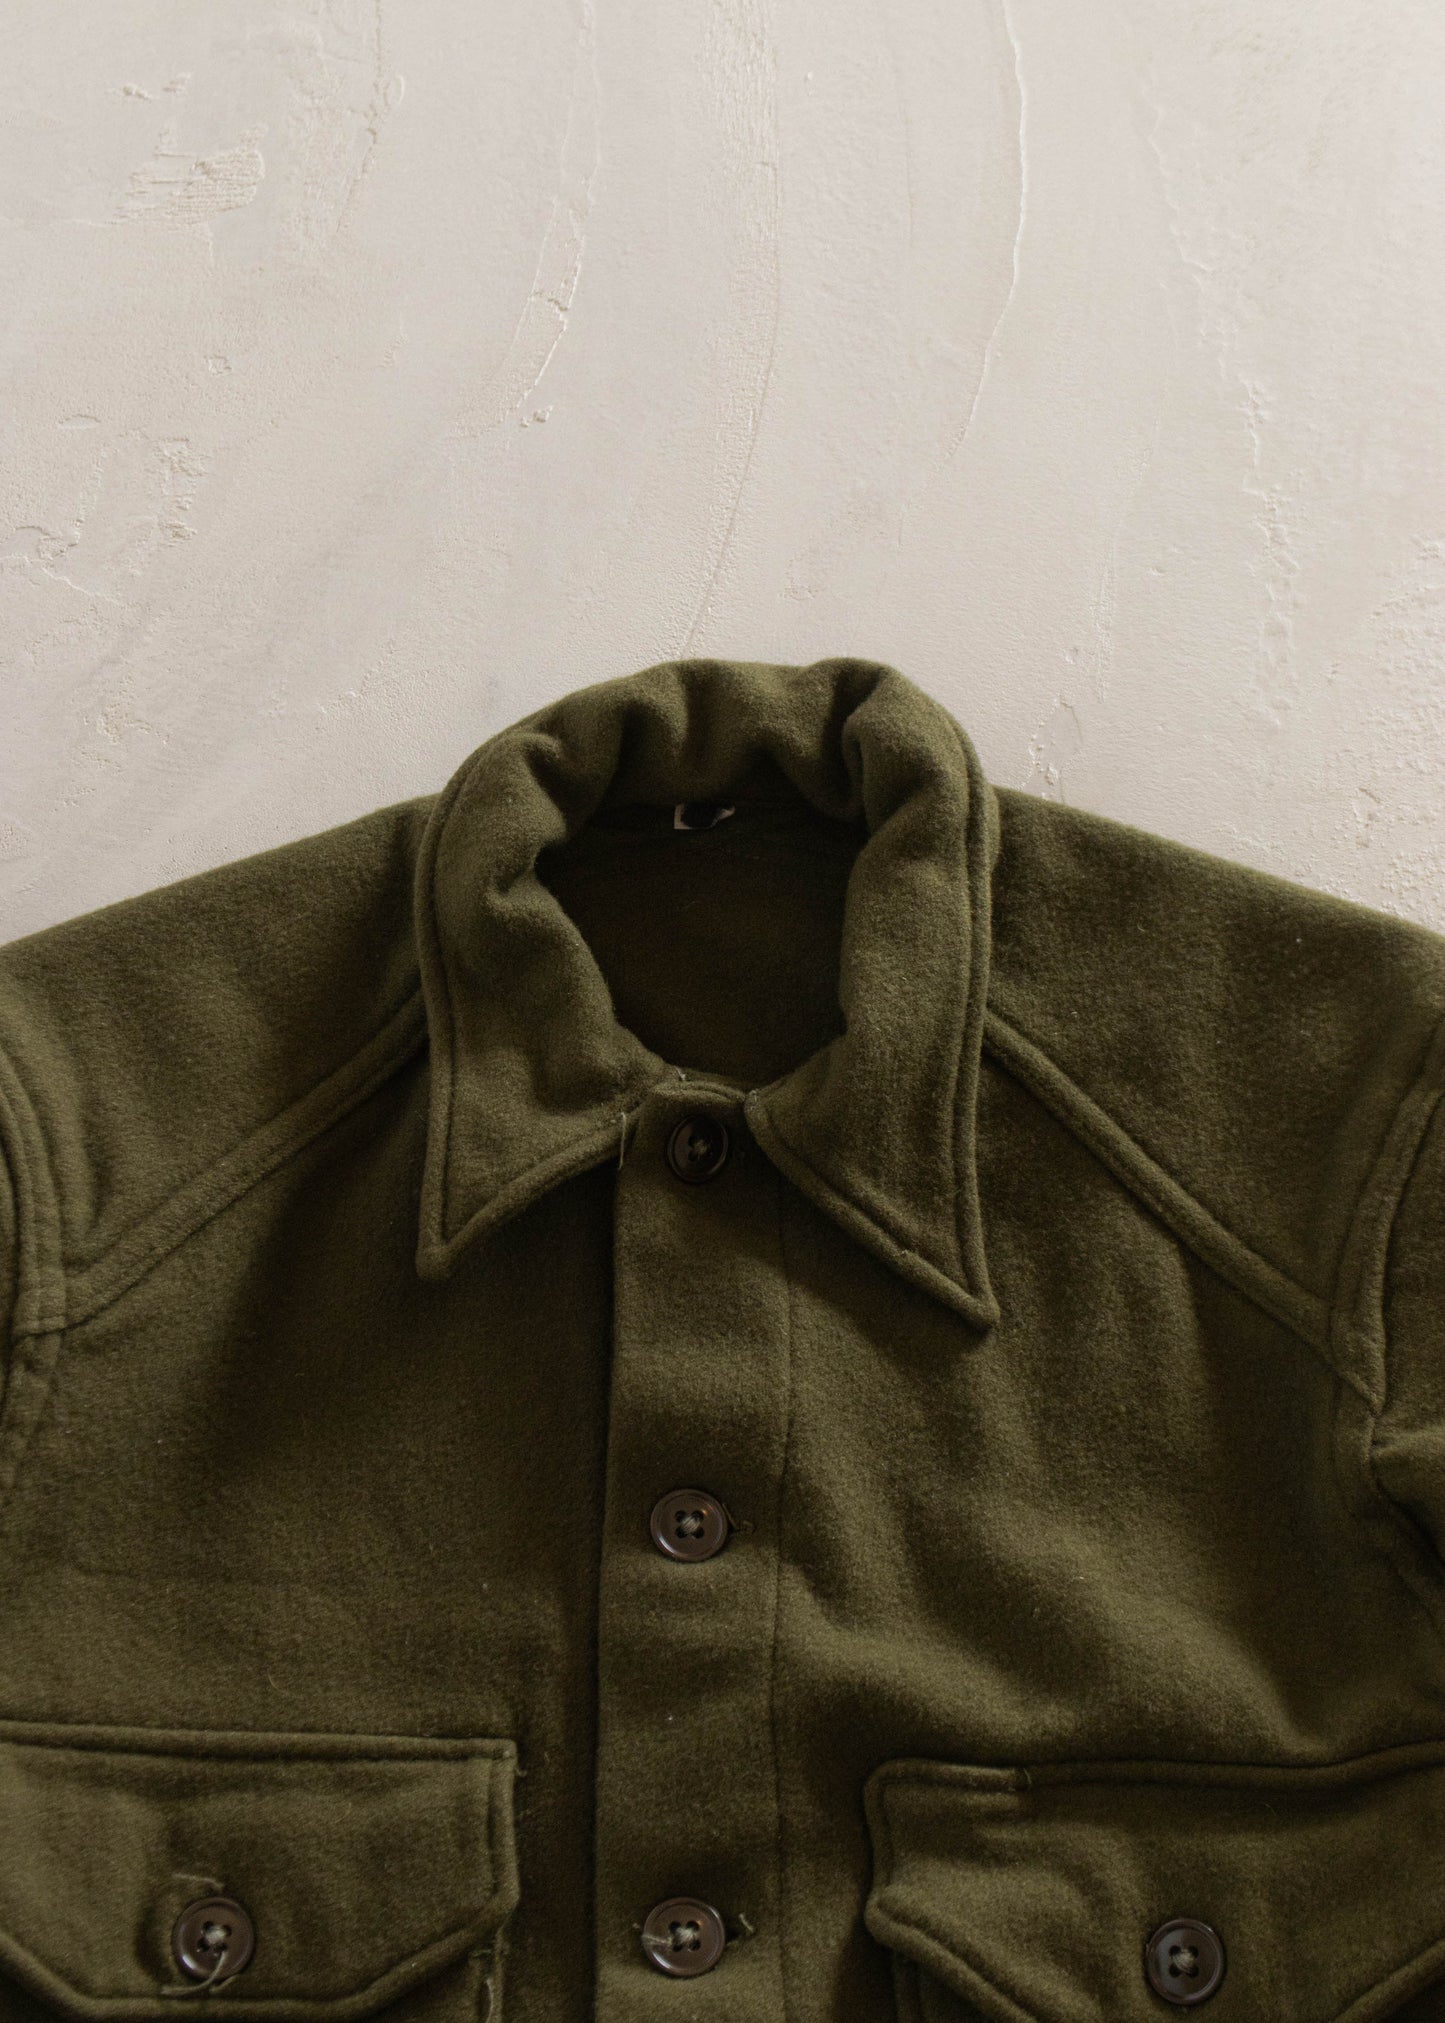 1980s Military OG 108 Wool Button Up Shirt Size S/M